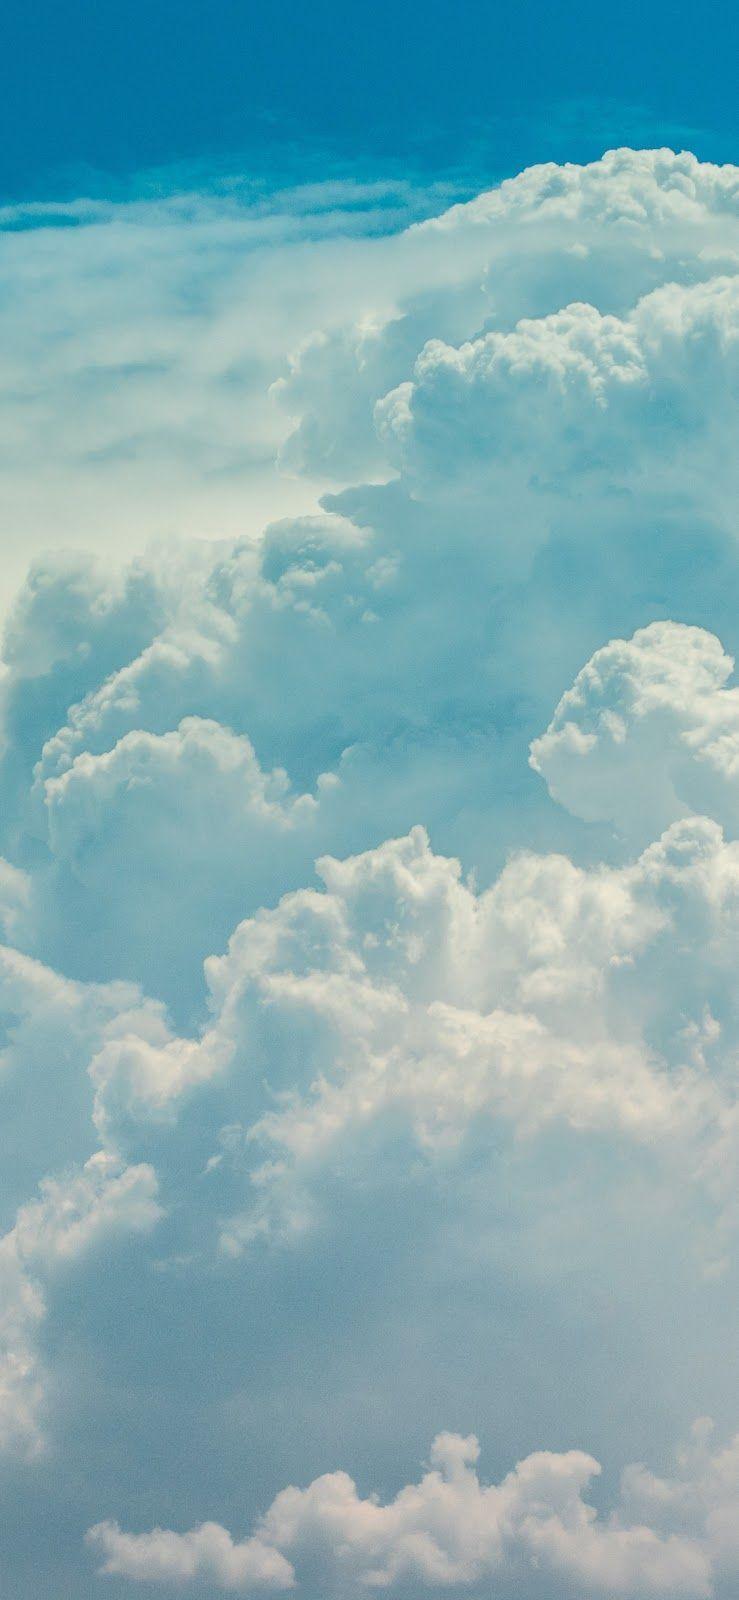 Cloudy Sky Images  Free Photos PNG Stickers Wallpapers  Backgrounds   rawpixel